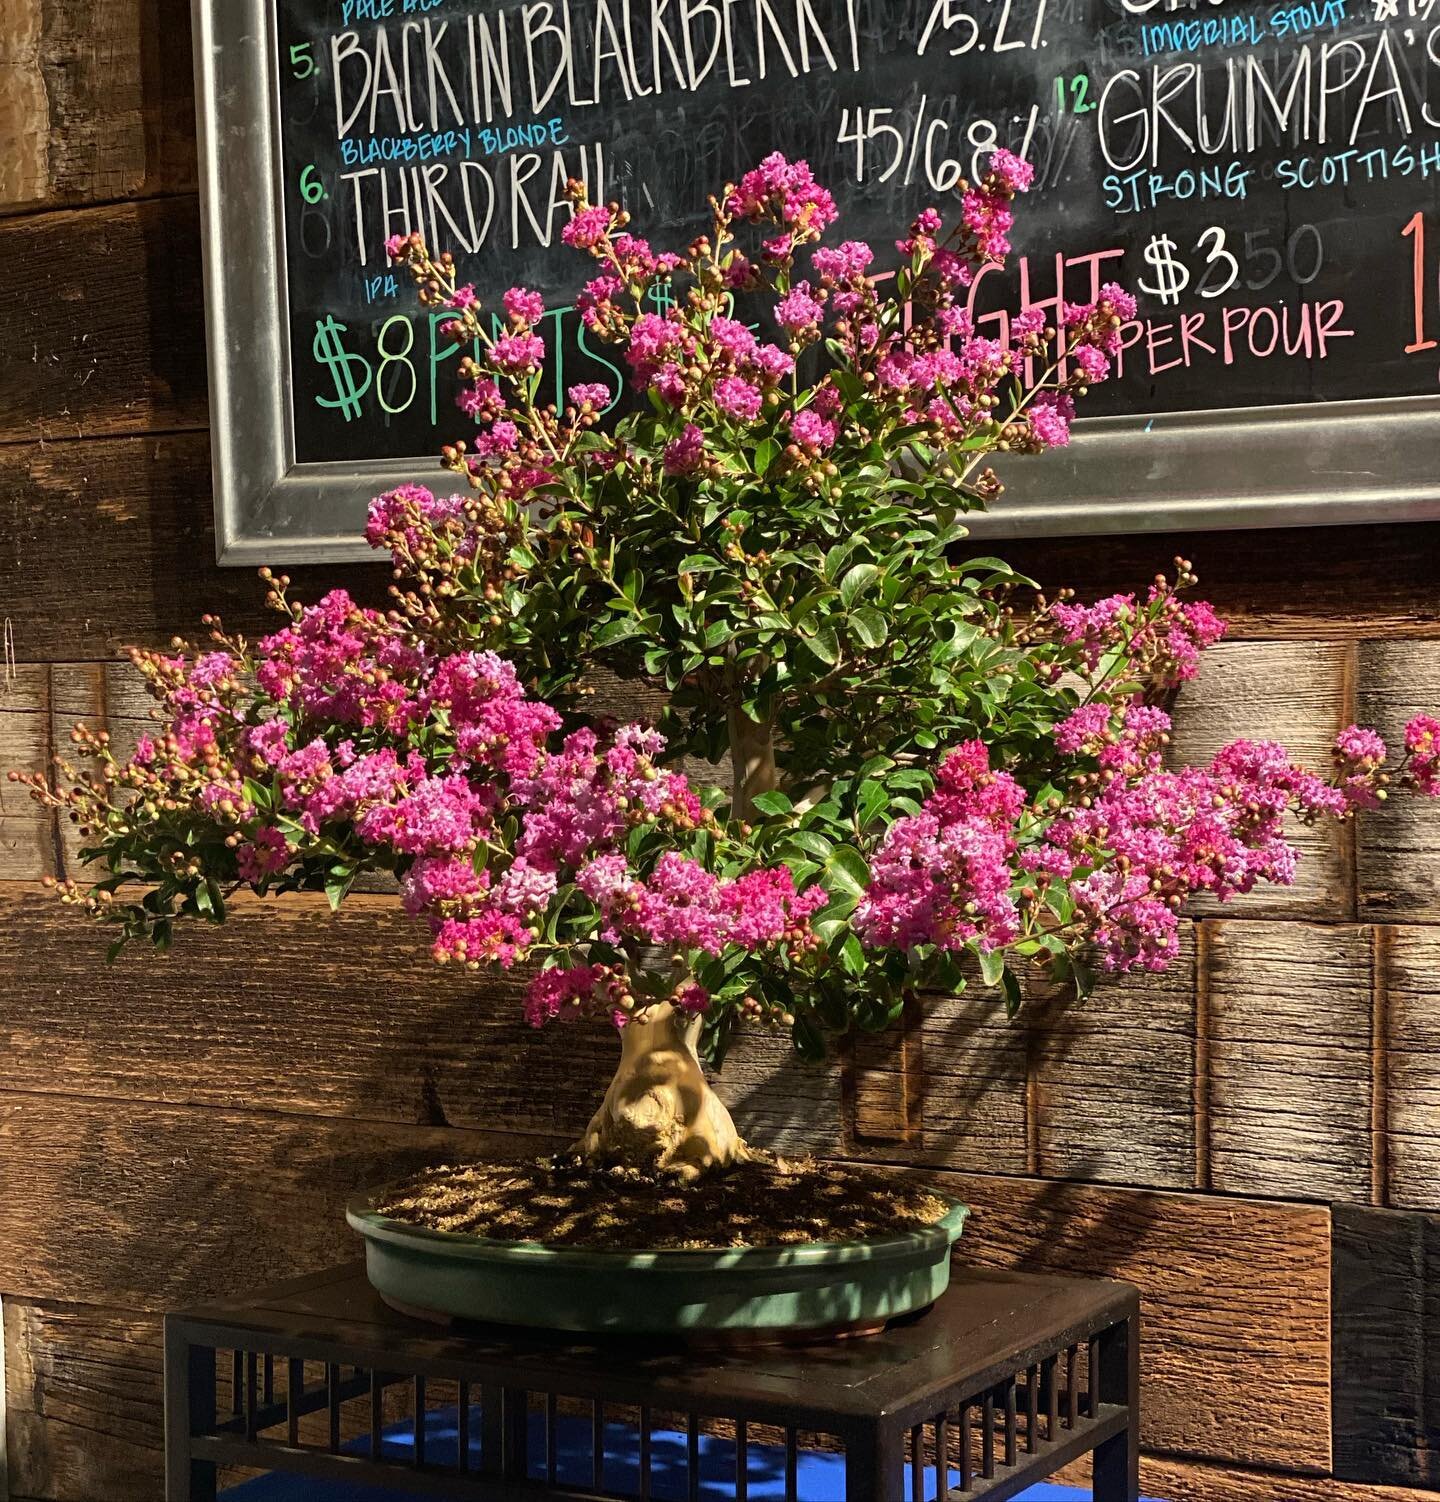 This week at IVB we are displaying a crepe myrtle bonsai. Janice purchased the tree from Orchard Nursery about 12 years ago when it was eight feet tall. She crammed the tree into her RAV4 and once home, sawed off the top 6 feet. She then waited until